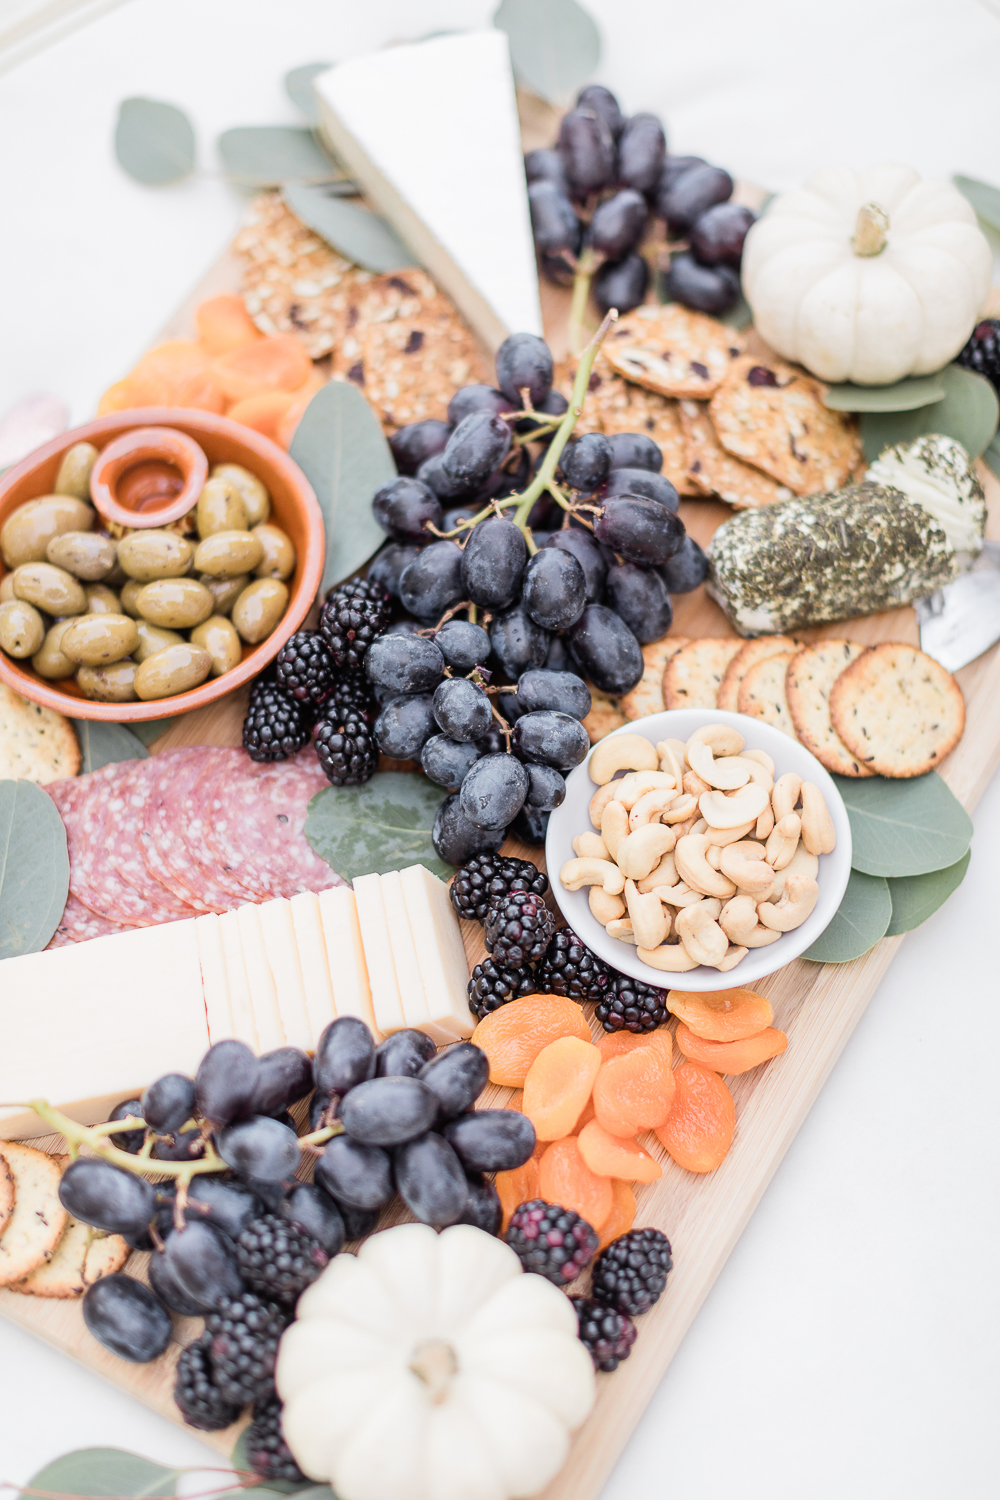 Fall cheese and charcuterie board created by blogger Stephanie Ziajka on Diary of a Debutante